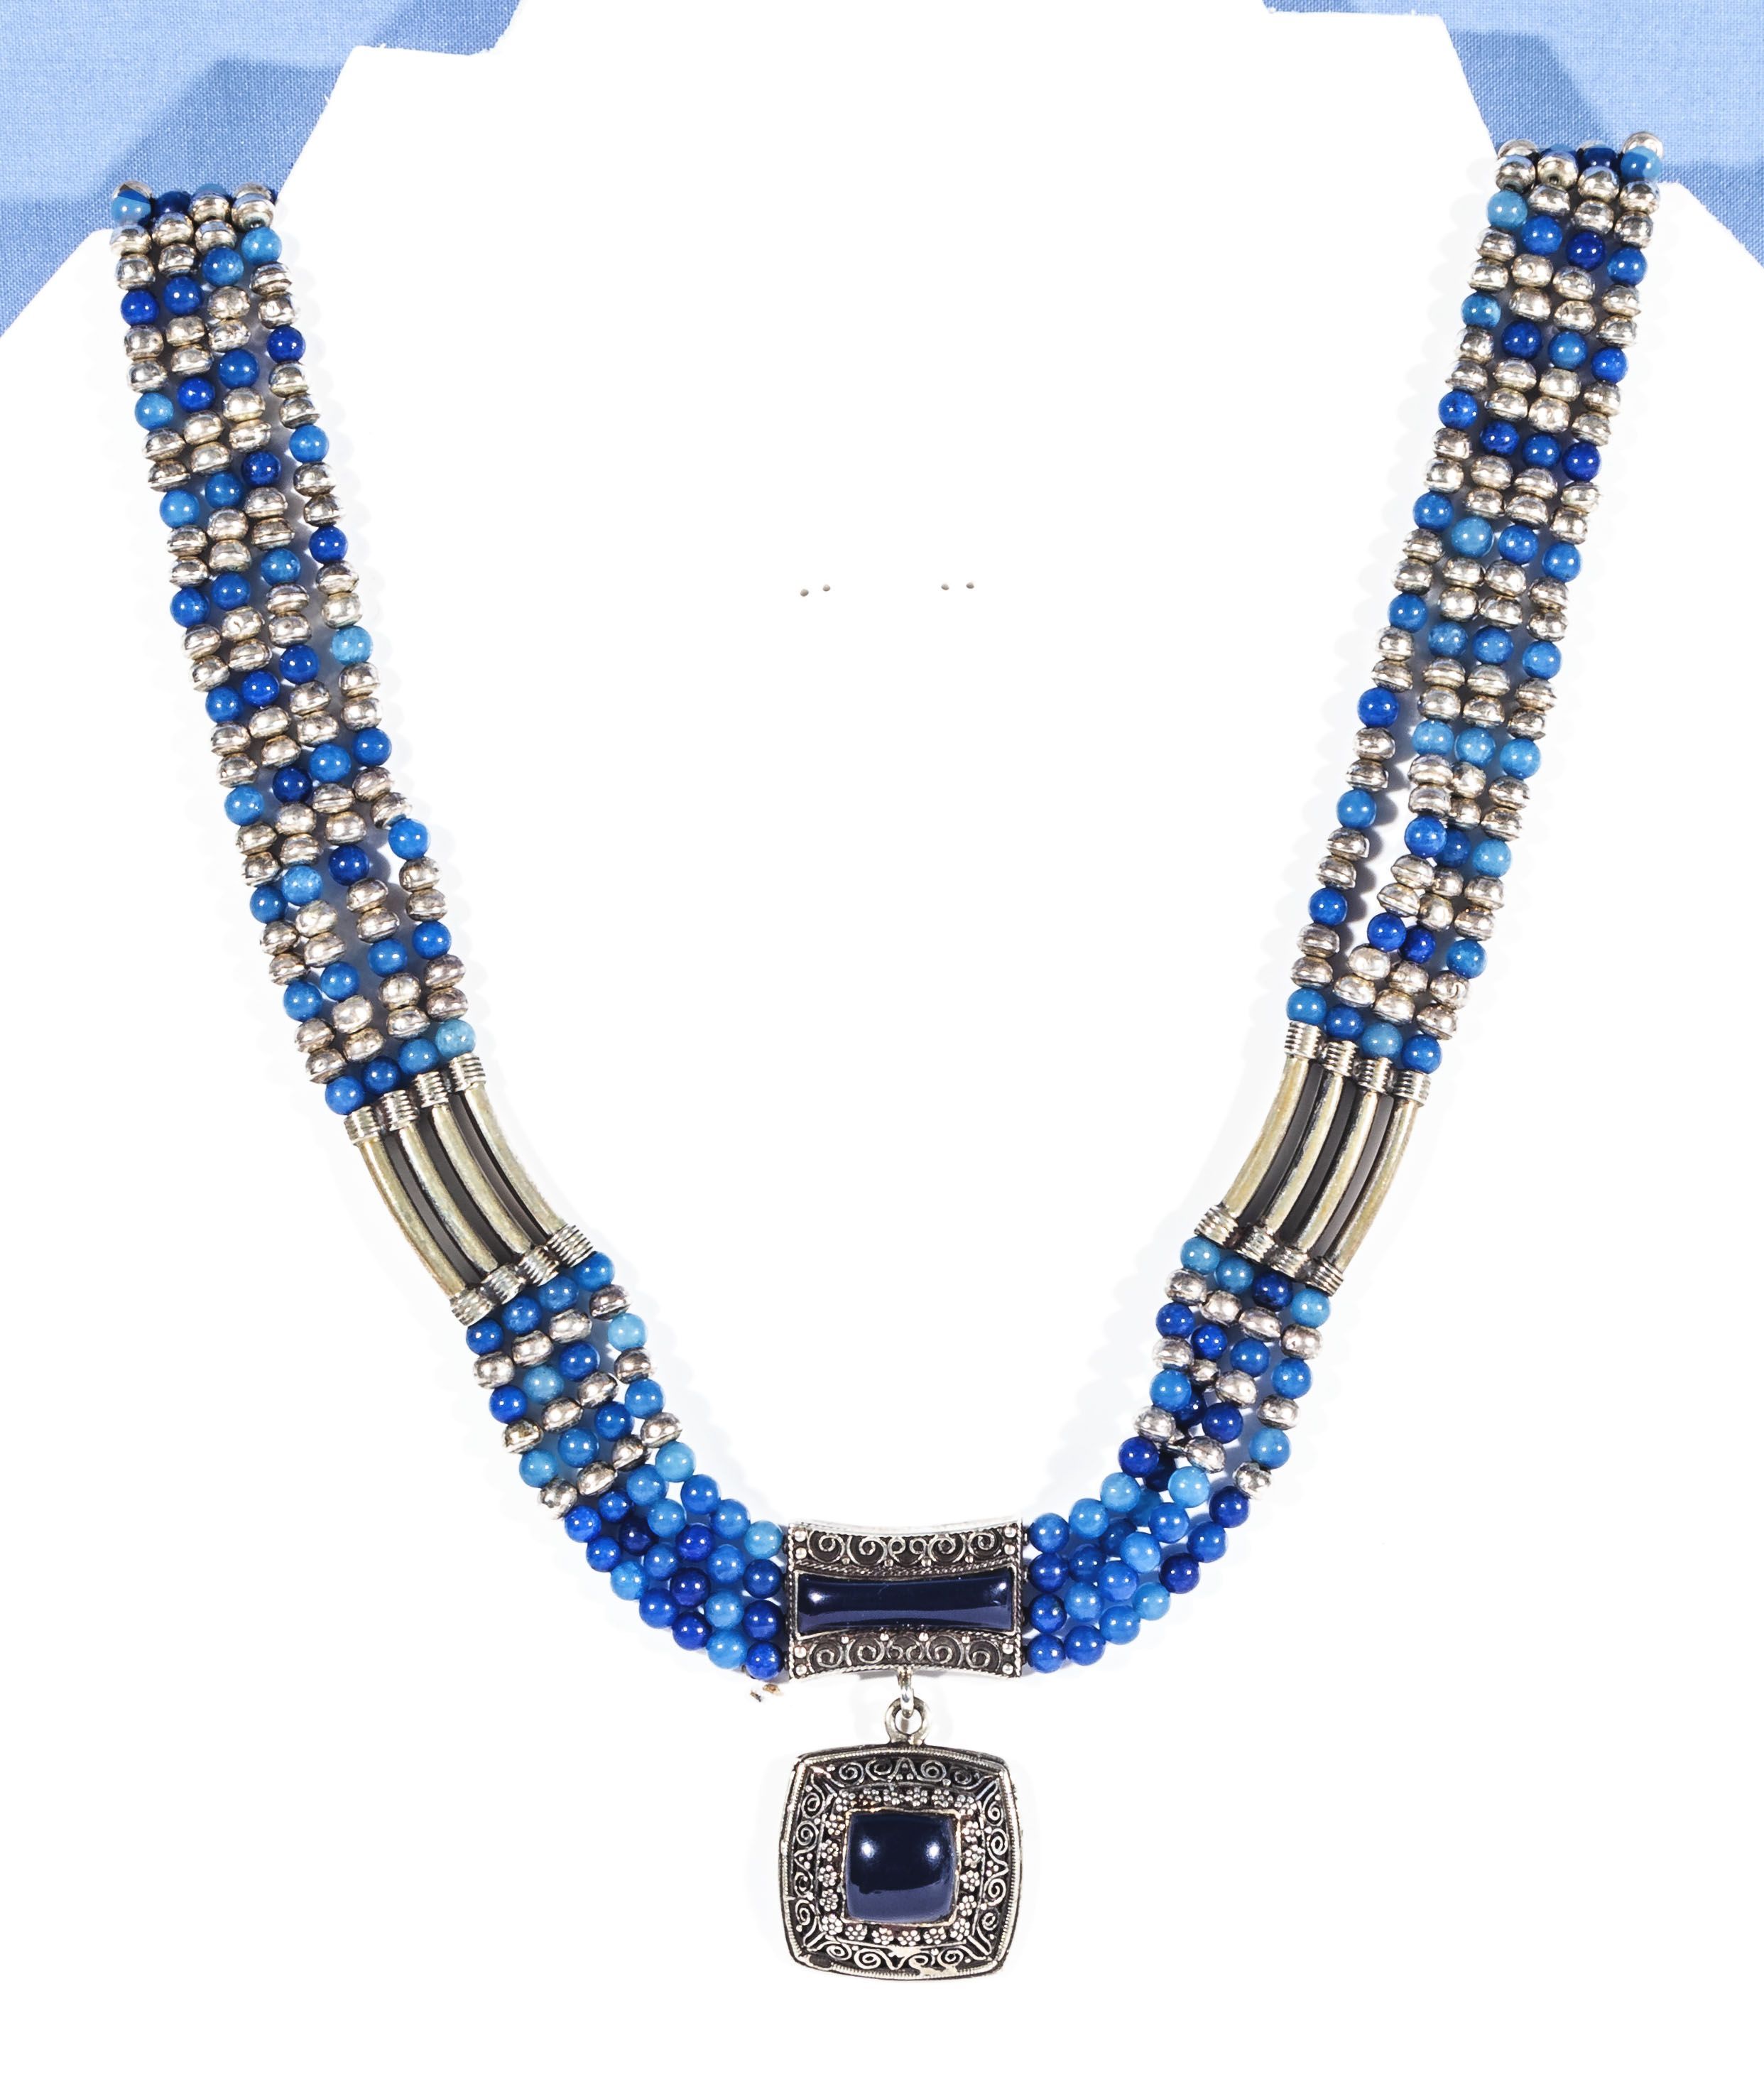 A lapis lazuli and white metal beaded necklace